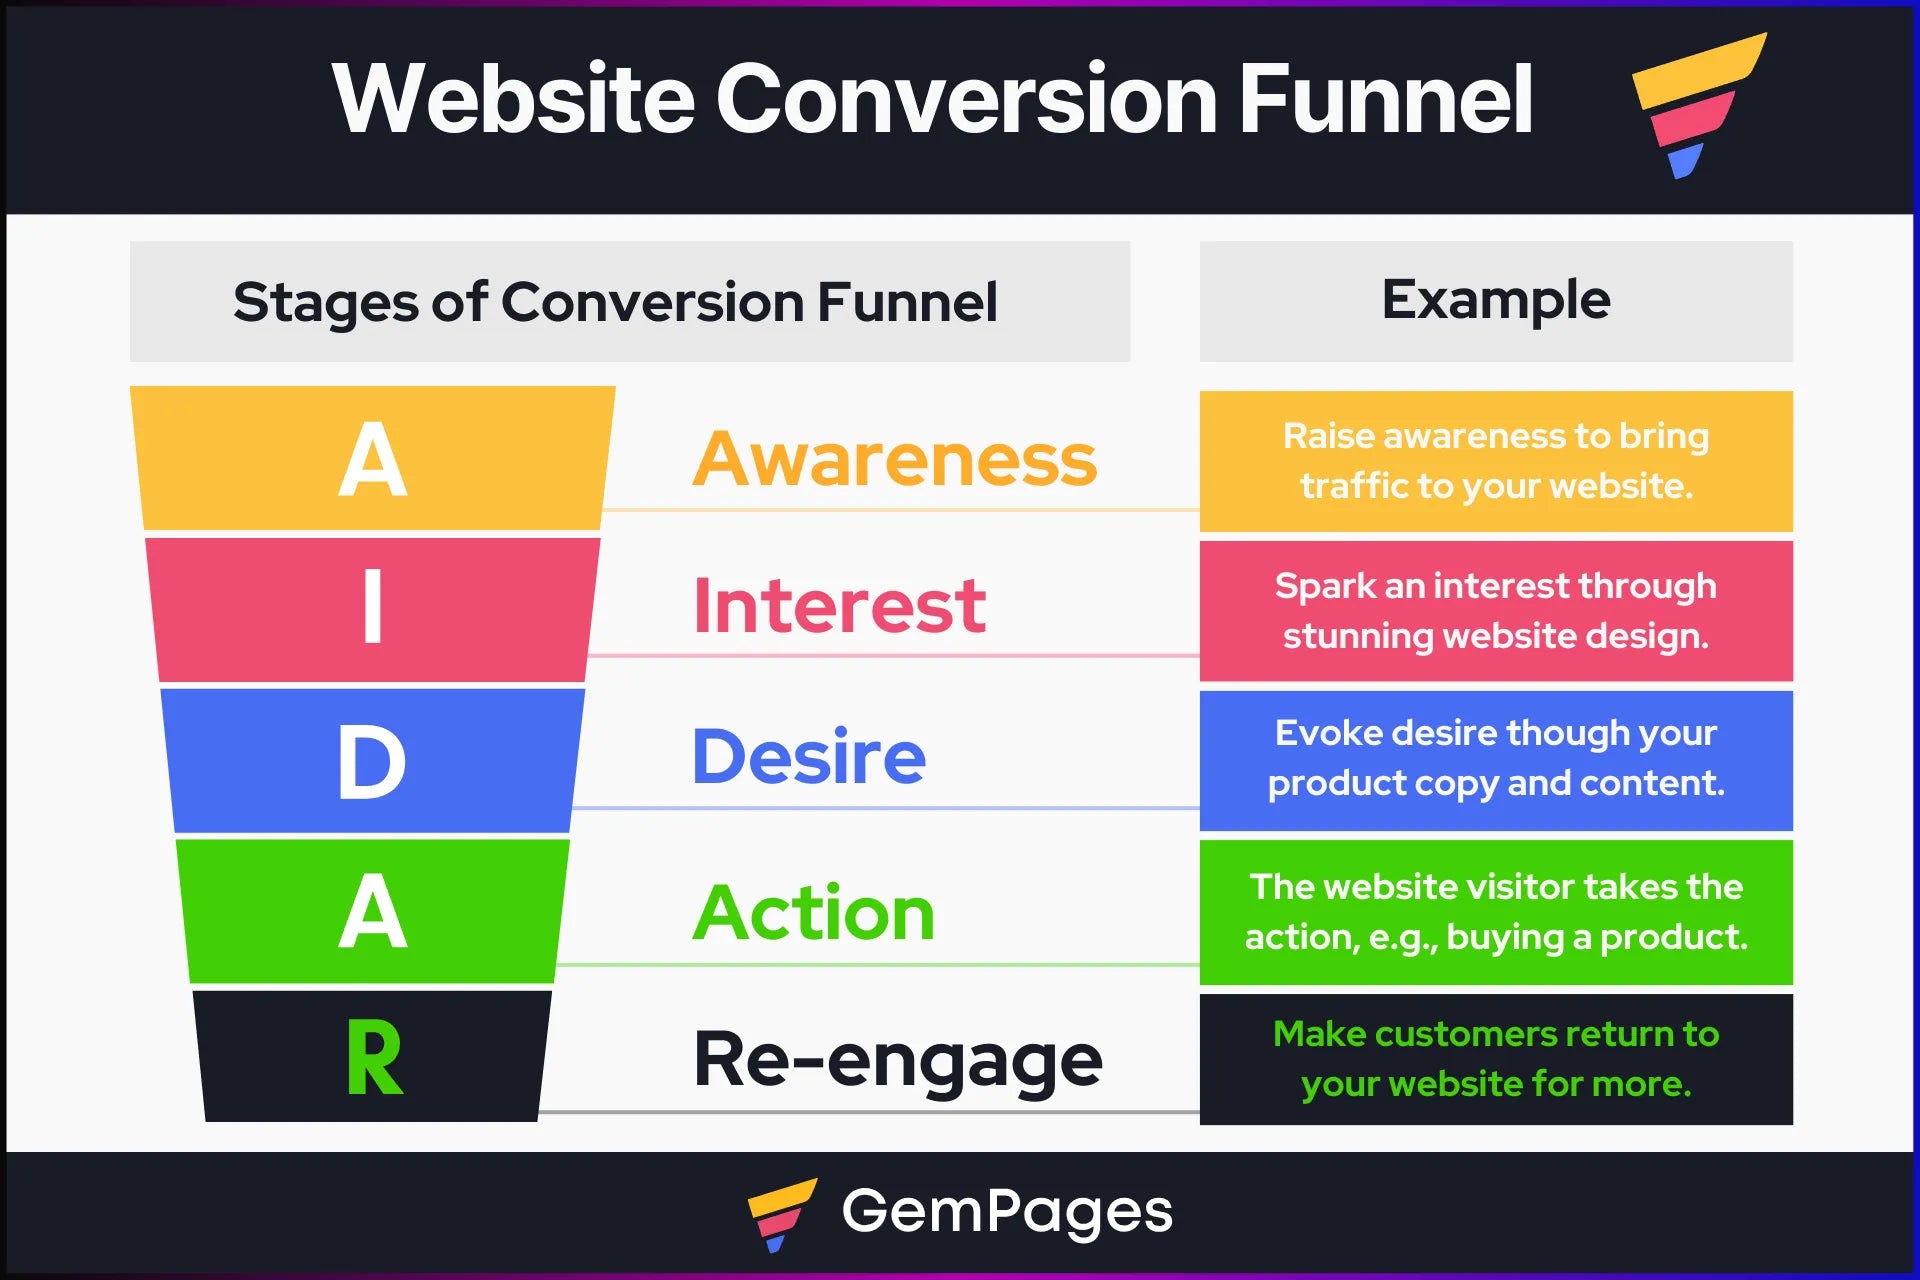 Graphical presentation of the website conversion funnel stages